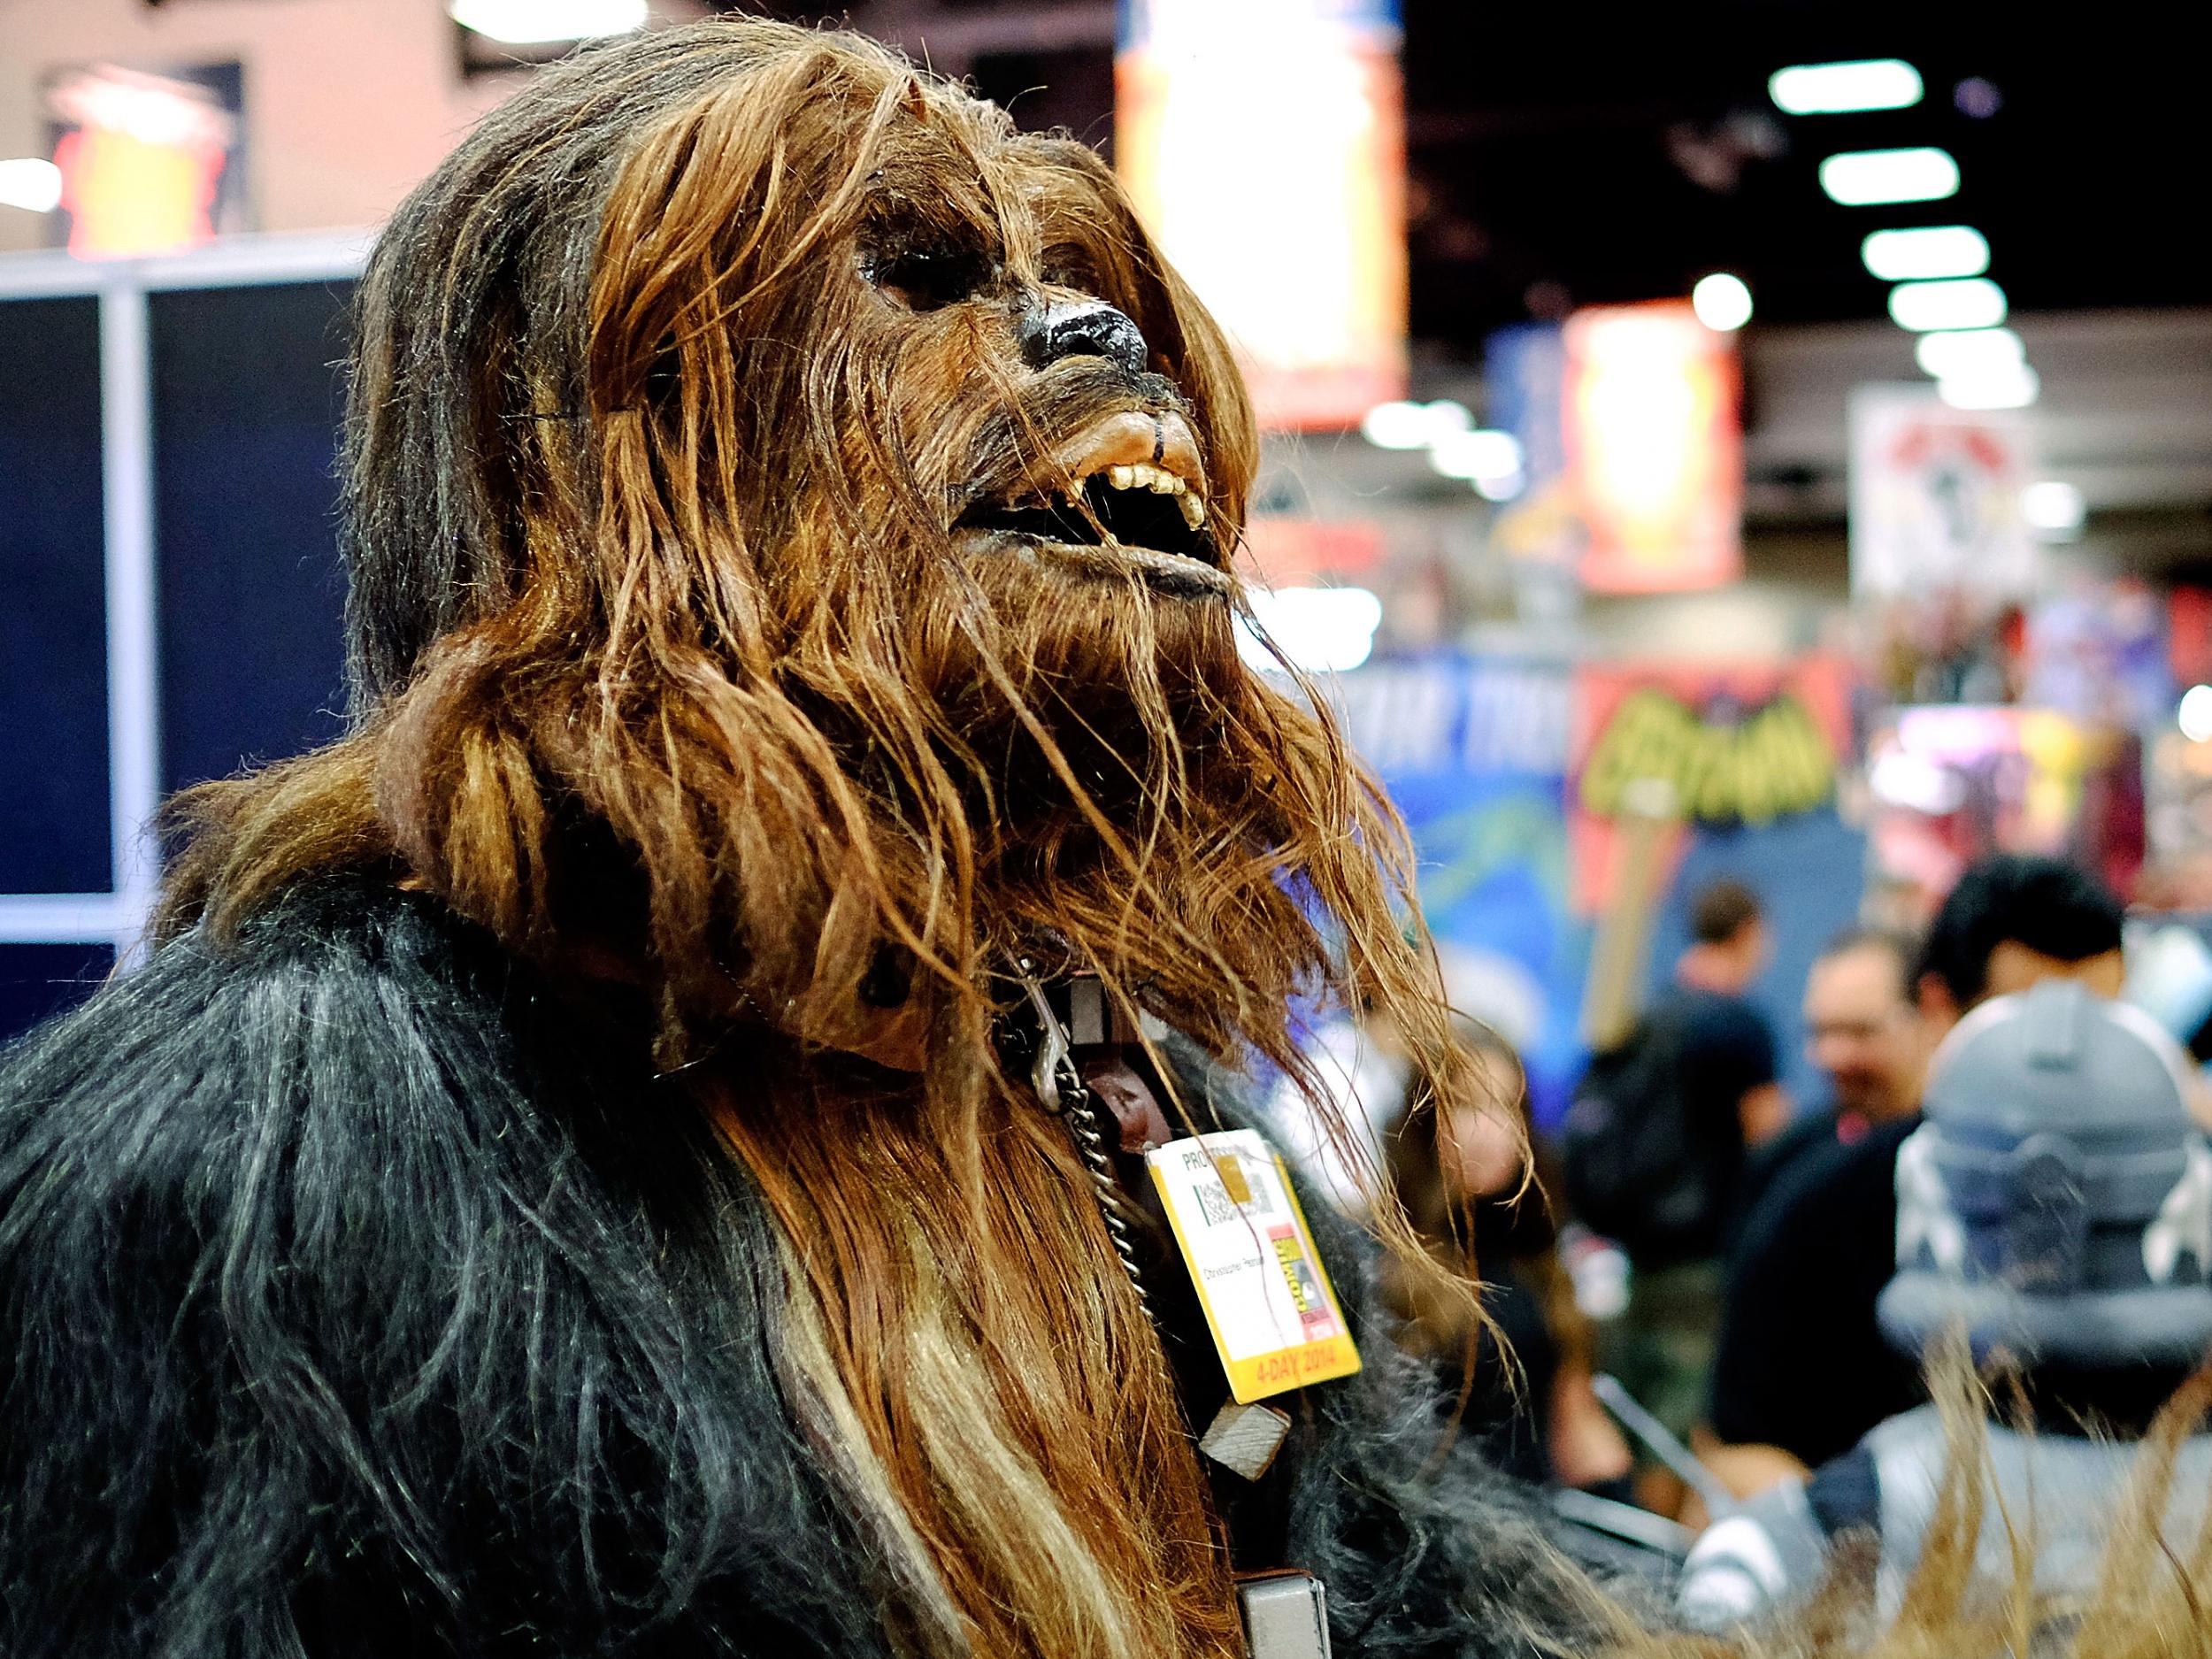 Christopher Petrone, of San Diego, CA, towering over attendees in his handmade, to-scale Chewbacca costume, during the 45th annual San Diego Comic-Con